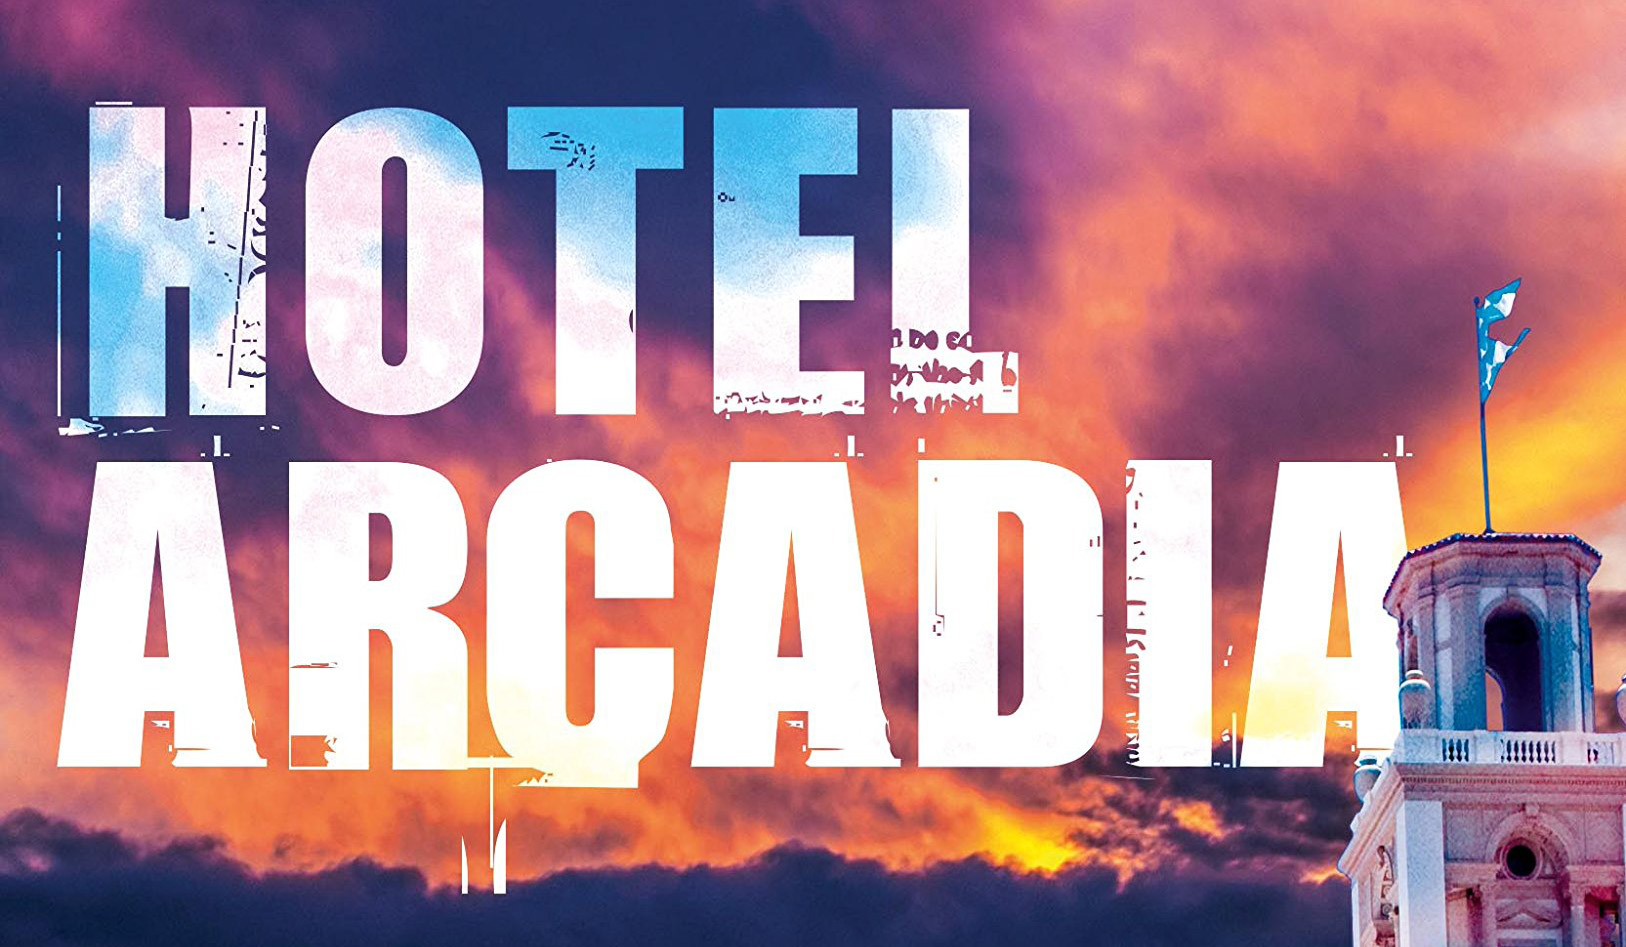 Hotel Arcadia book cover cropped to show title only